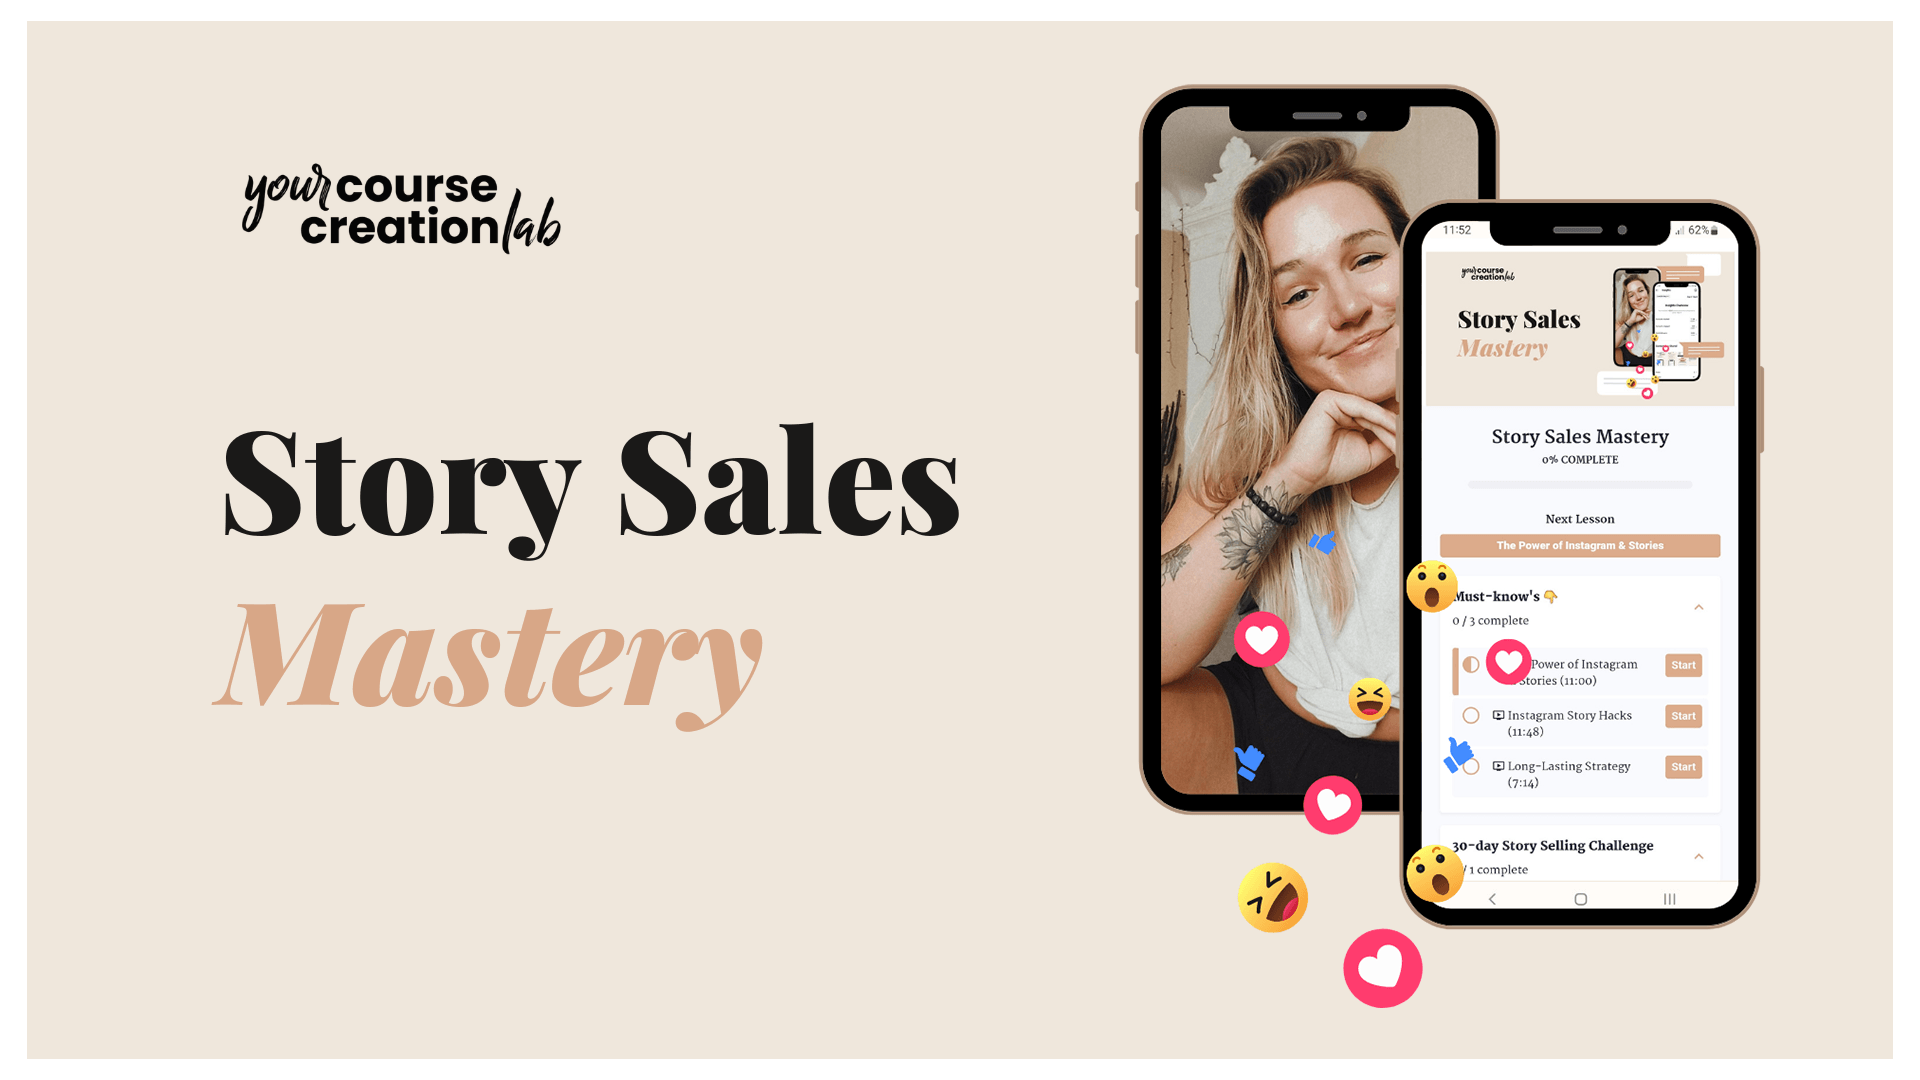 Story Sales Mastery: 30-day Selling Challenge